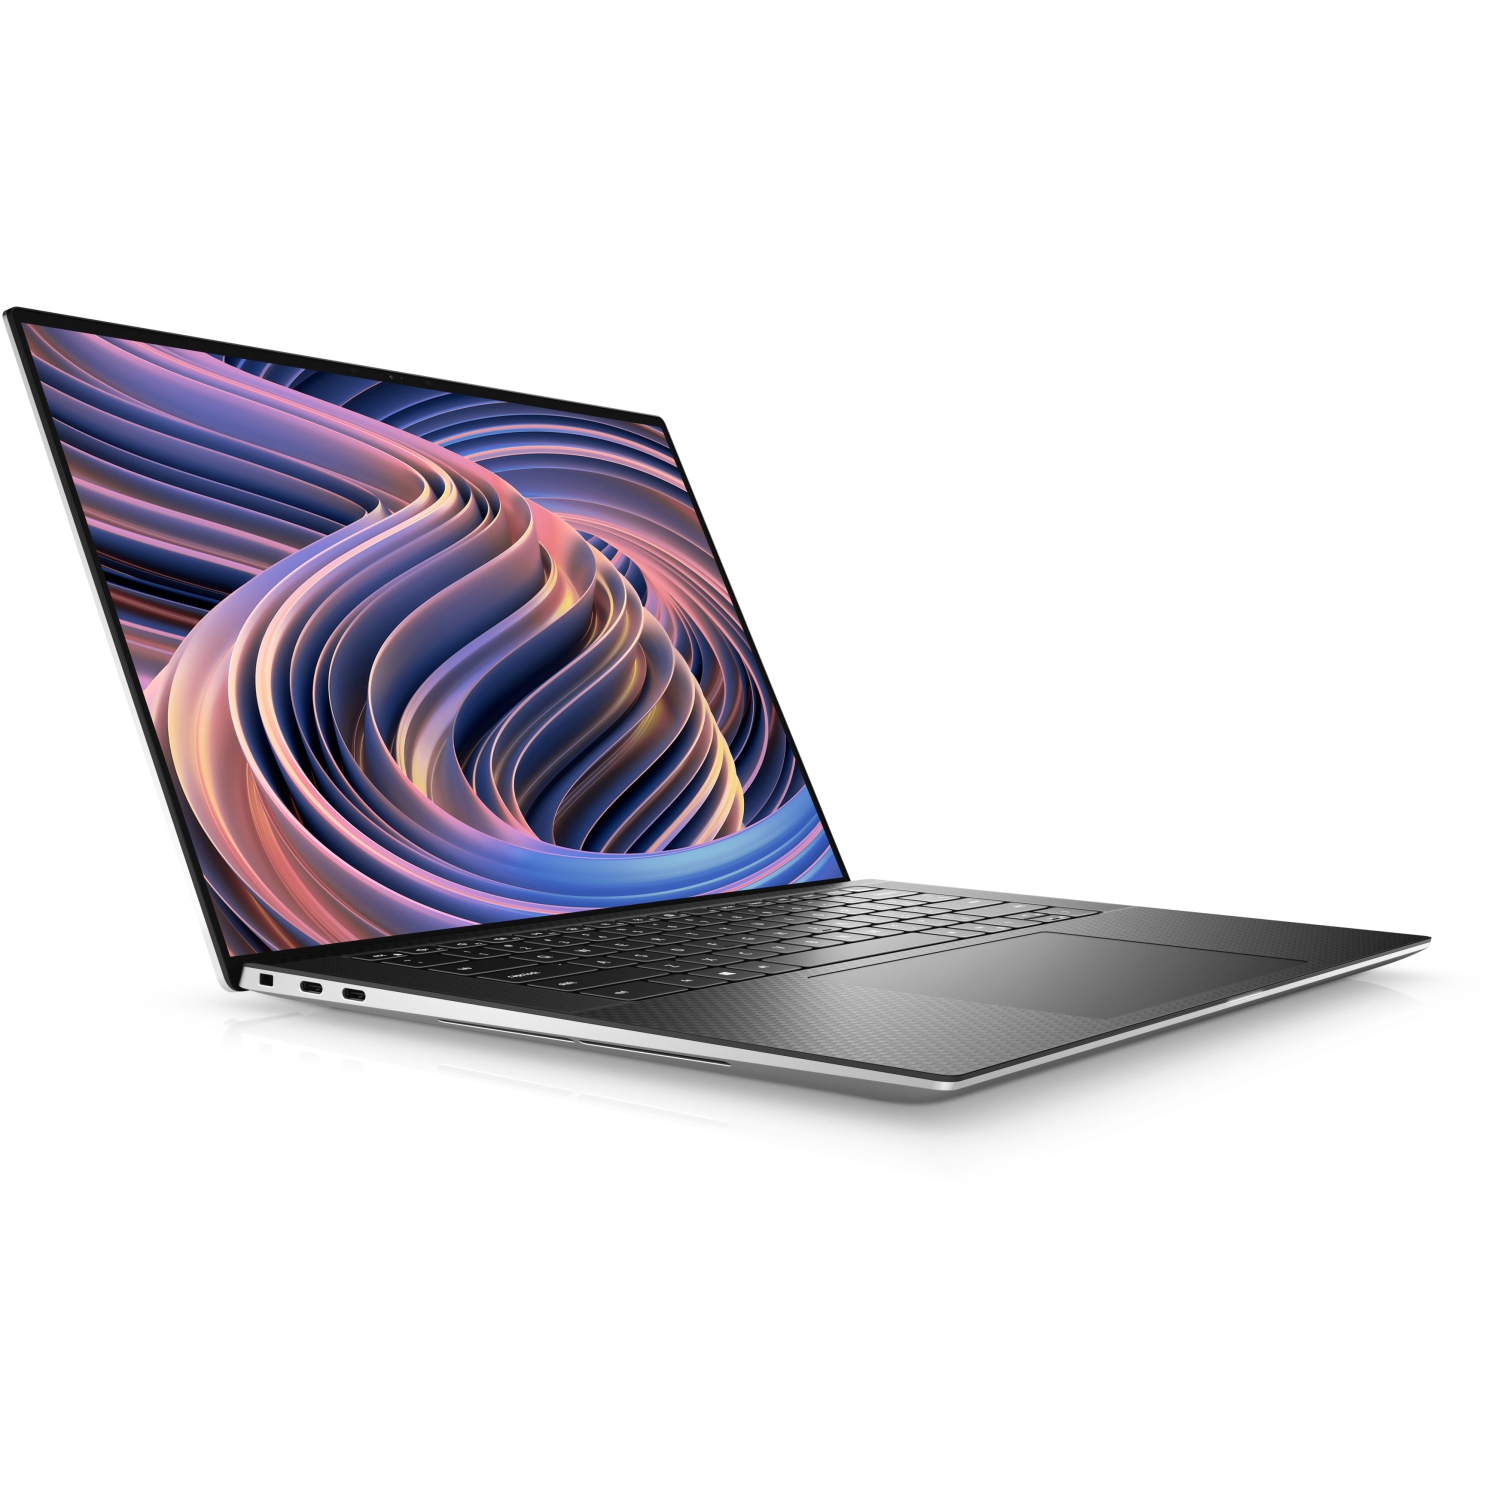 Refurbished (Excellent) - Dell XPS 15 9520, 15" FHD, Nvidia RTX 3050Ti, i9-12900HK, 32GB, 1TB SSD, WIN 11 HOME - Certified Refurbished